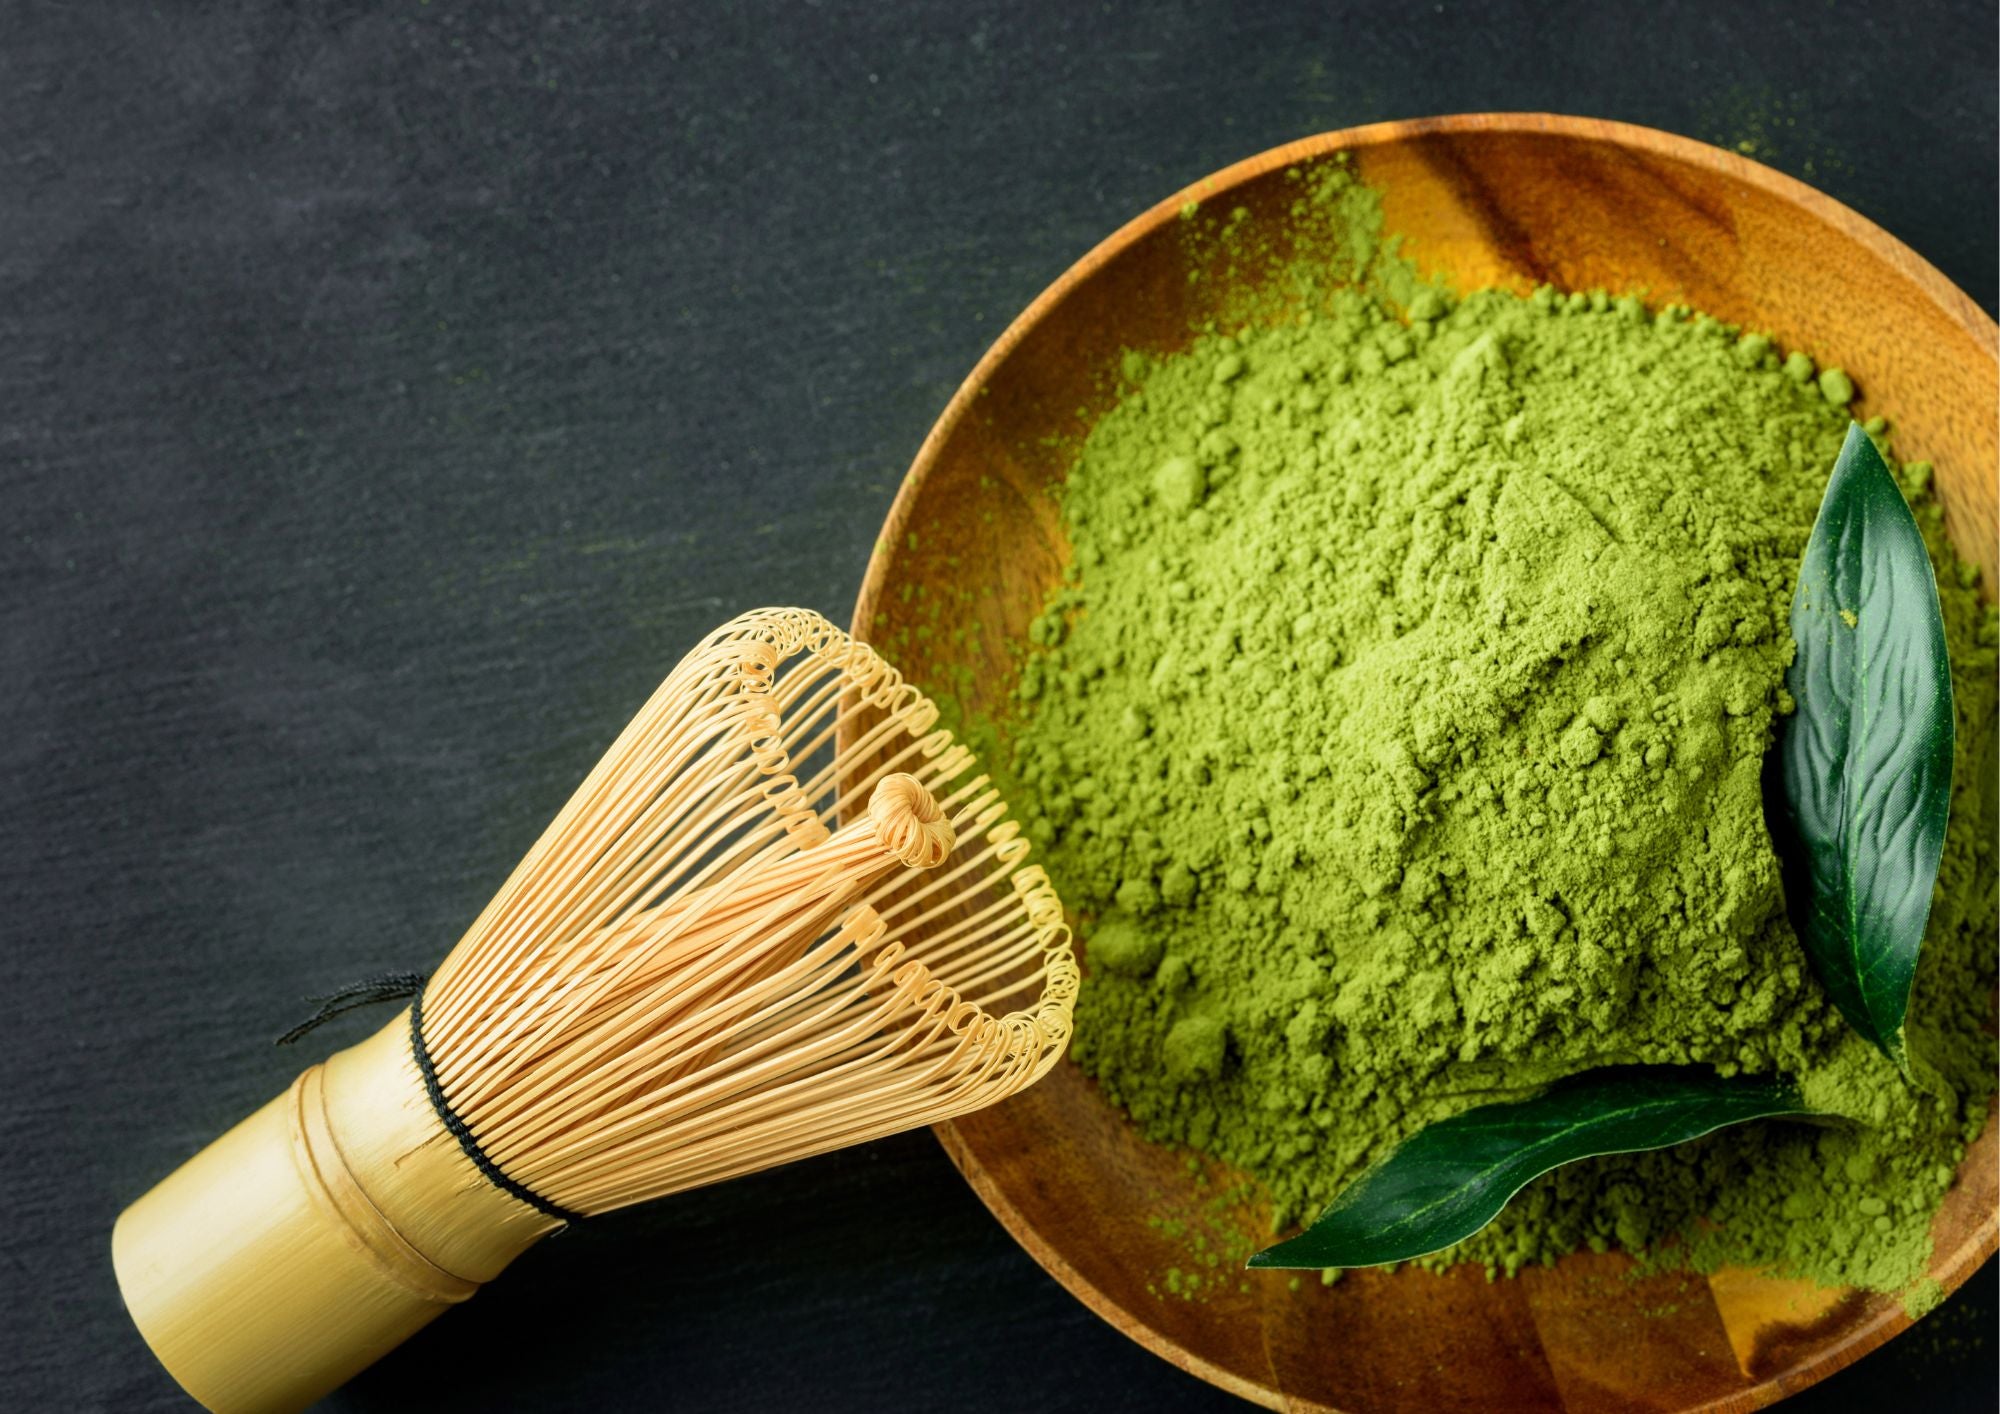 Unlocking the Delights of Japanese Matcha Powder: A Guide to Buying Organic Wholesale Matcha Tea